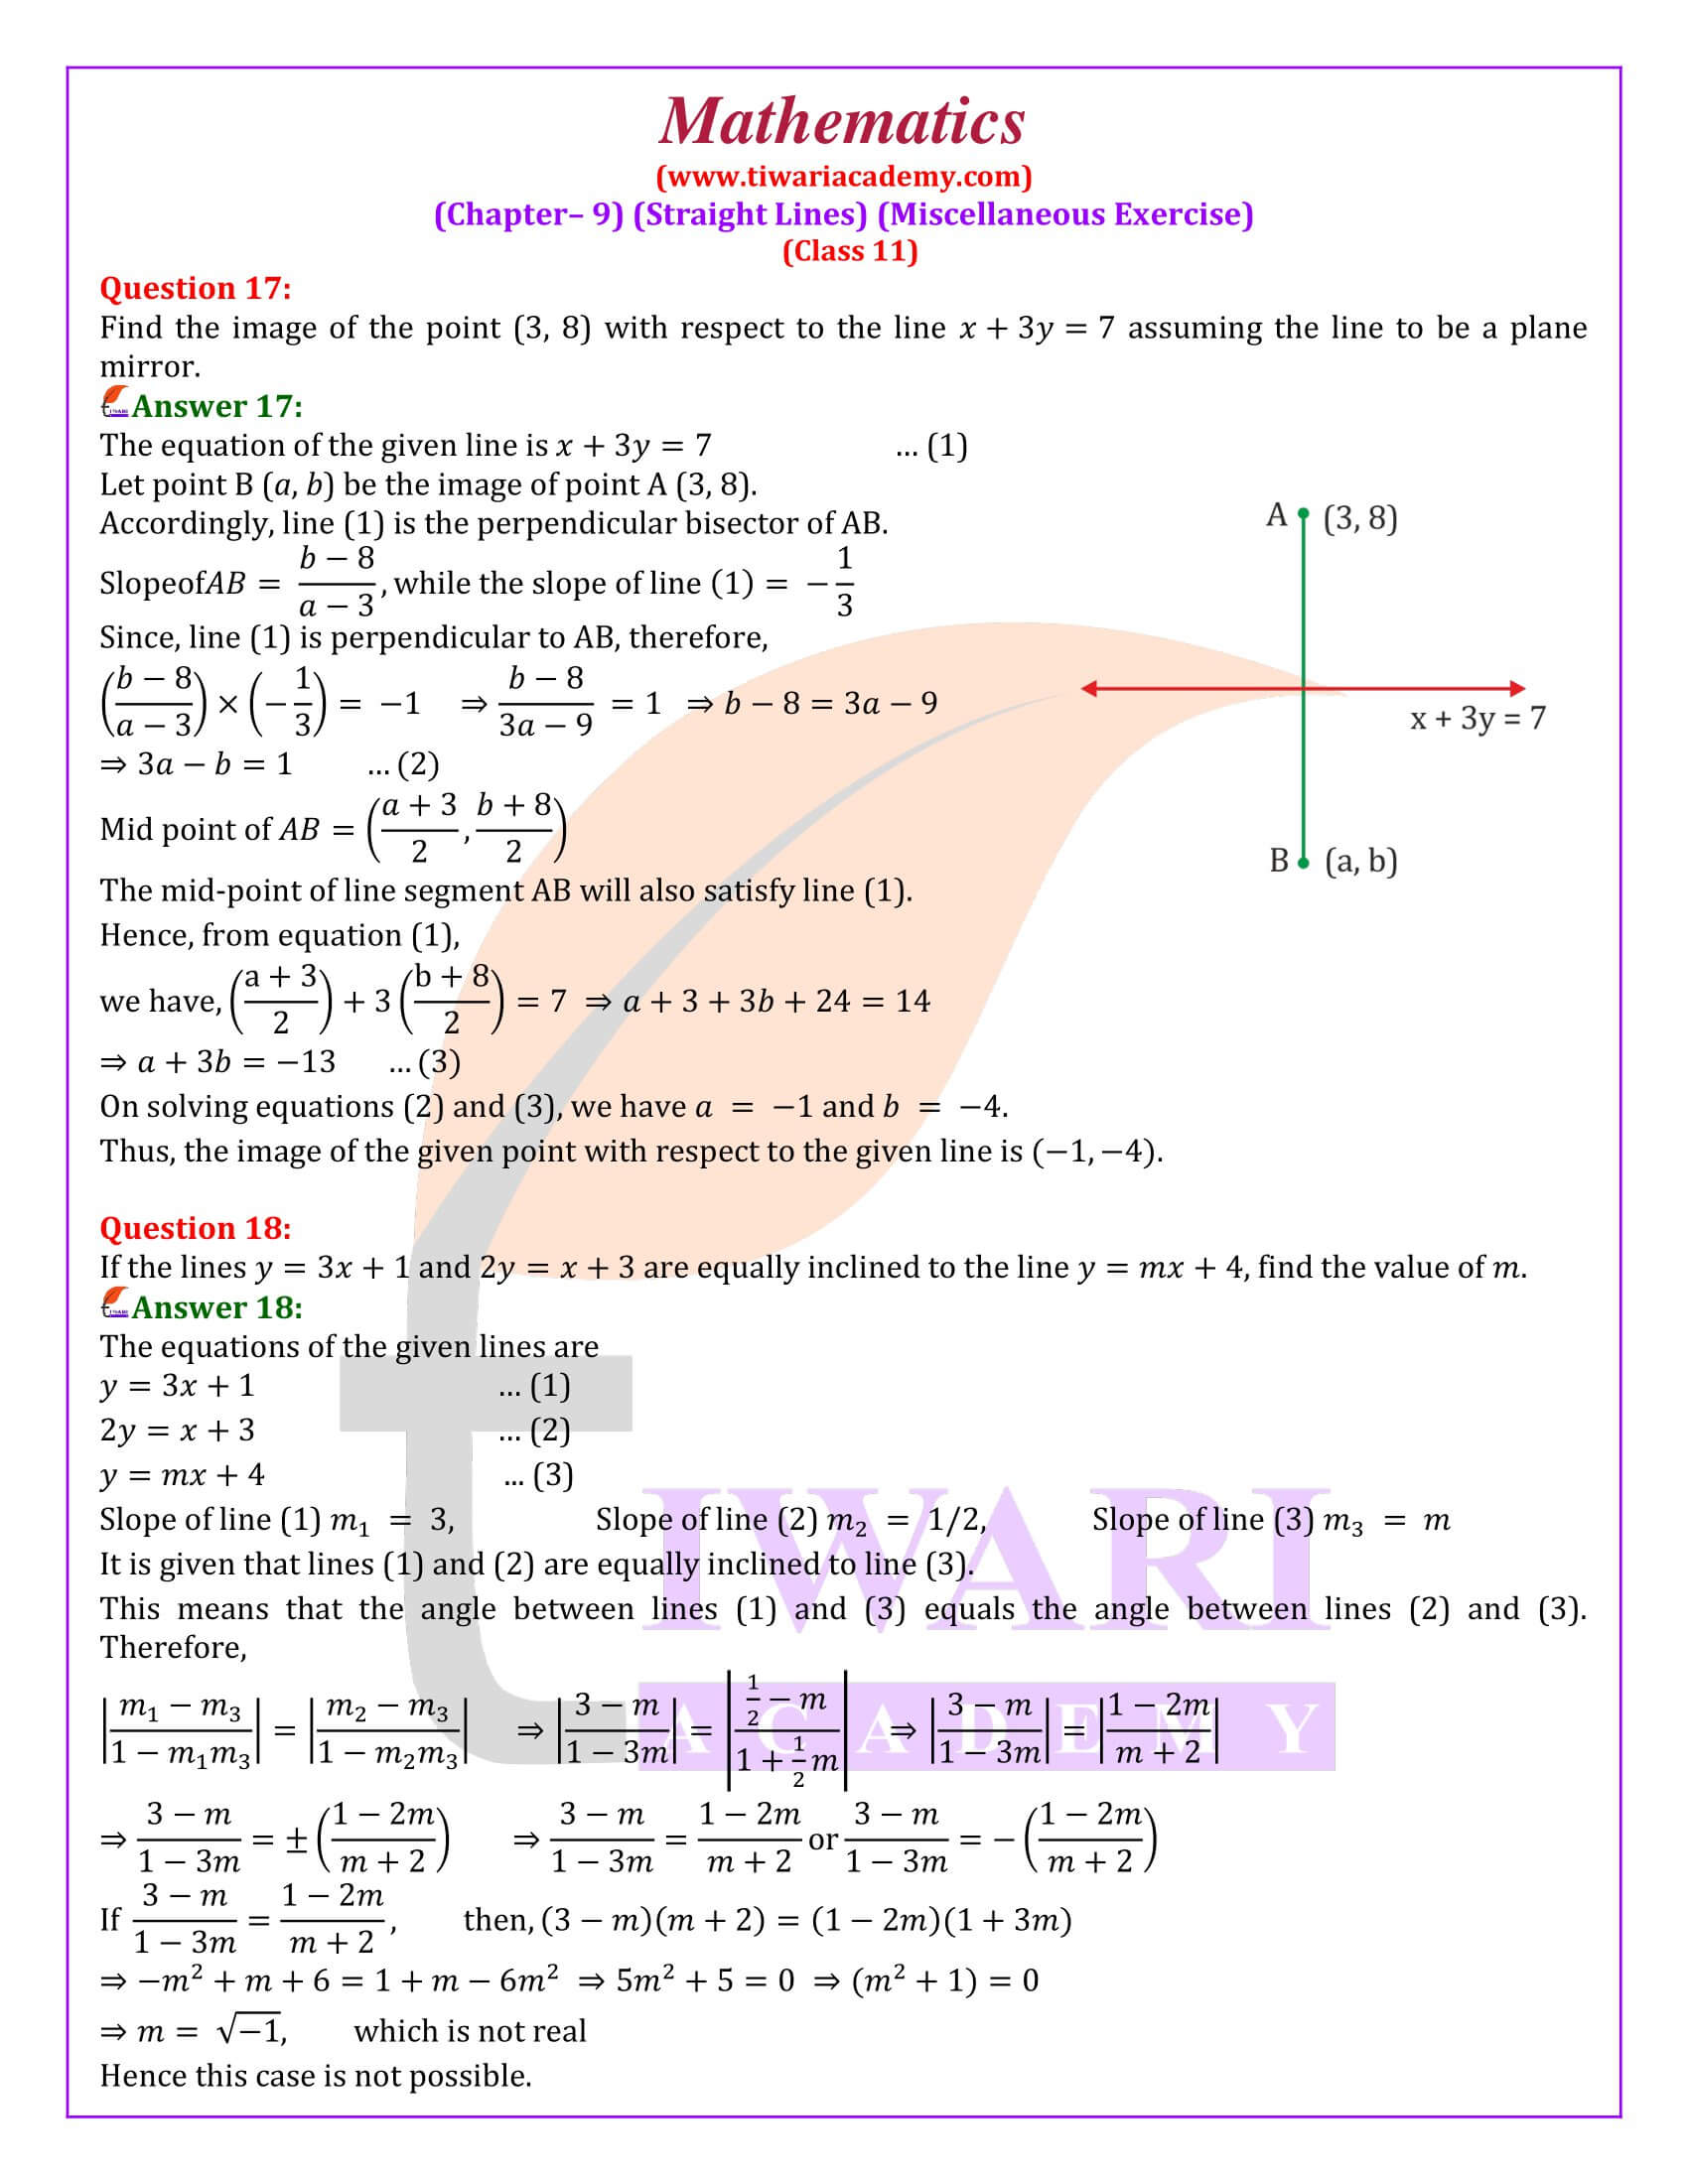 Class 11 Maths Chapter 9 Miscellaneous Exercise Question Answers